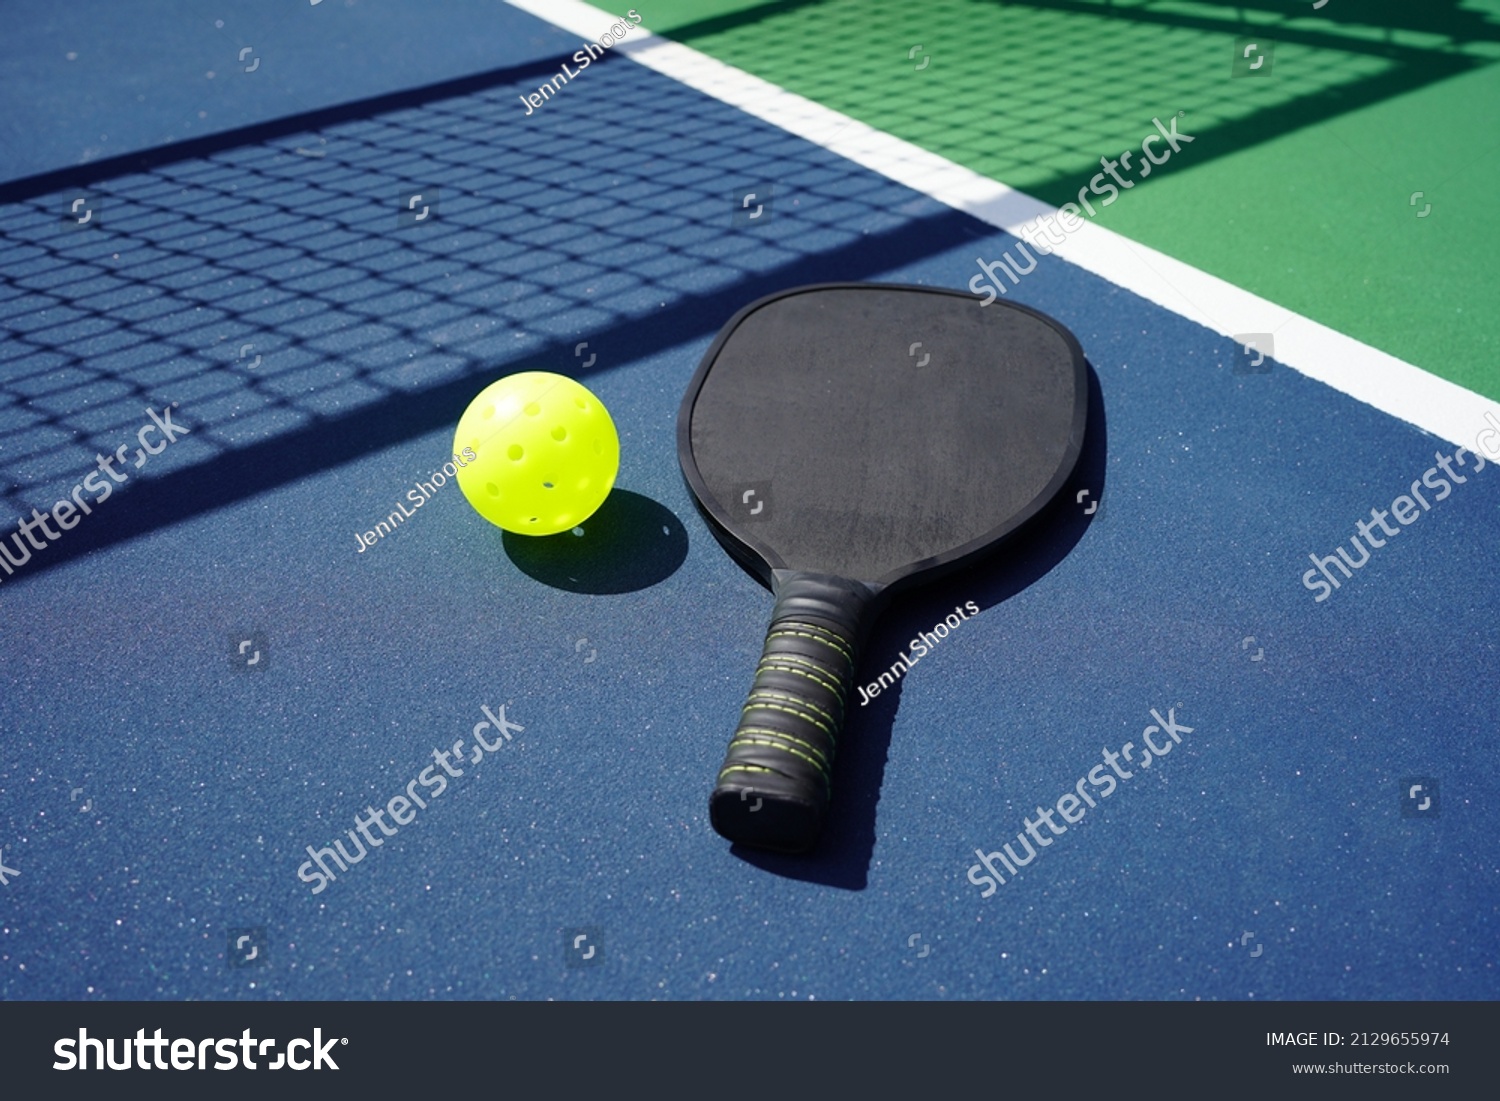 Pickle ball paddle and pickle ball on court with net shadow in background. #2129655974